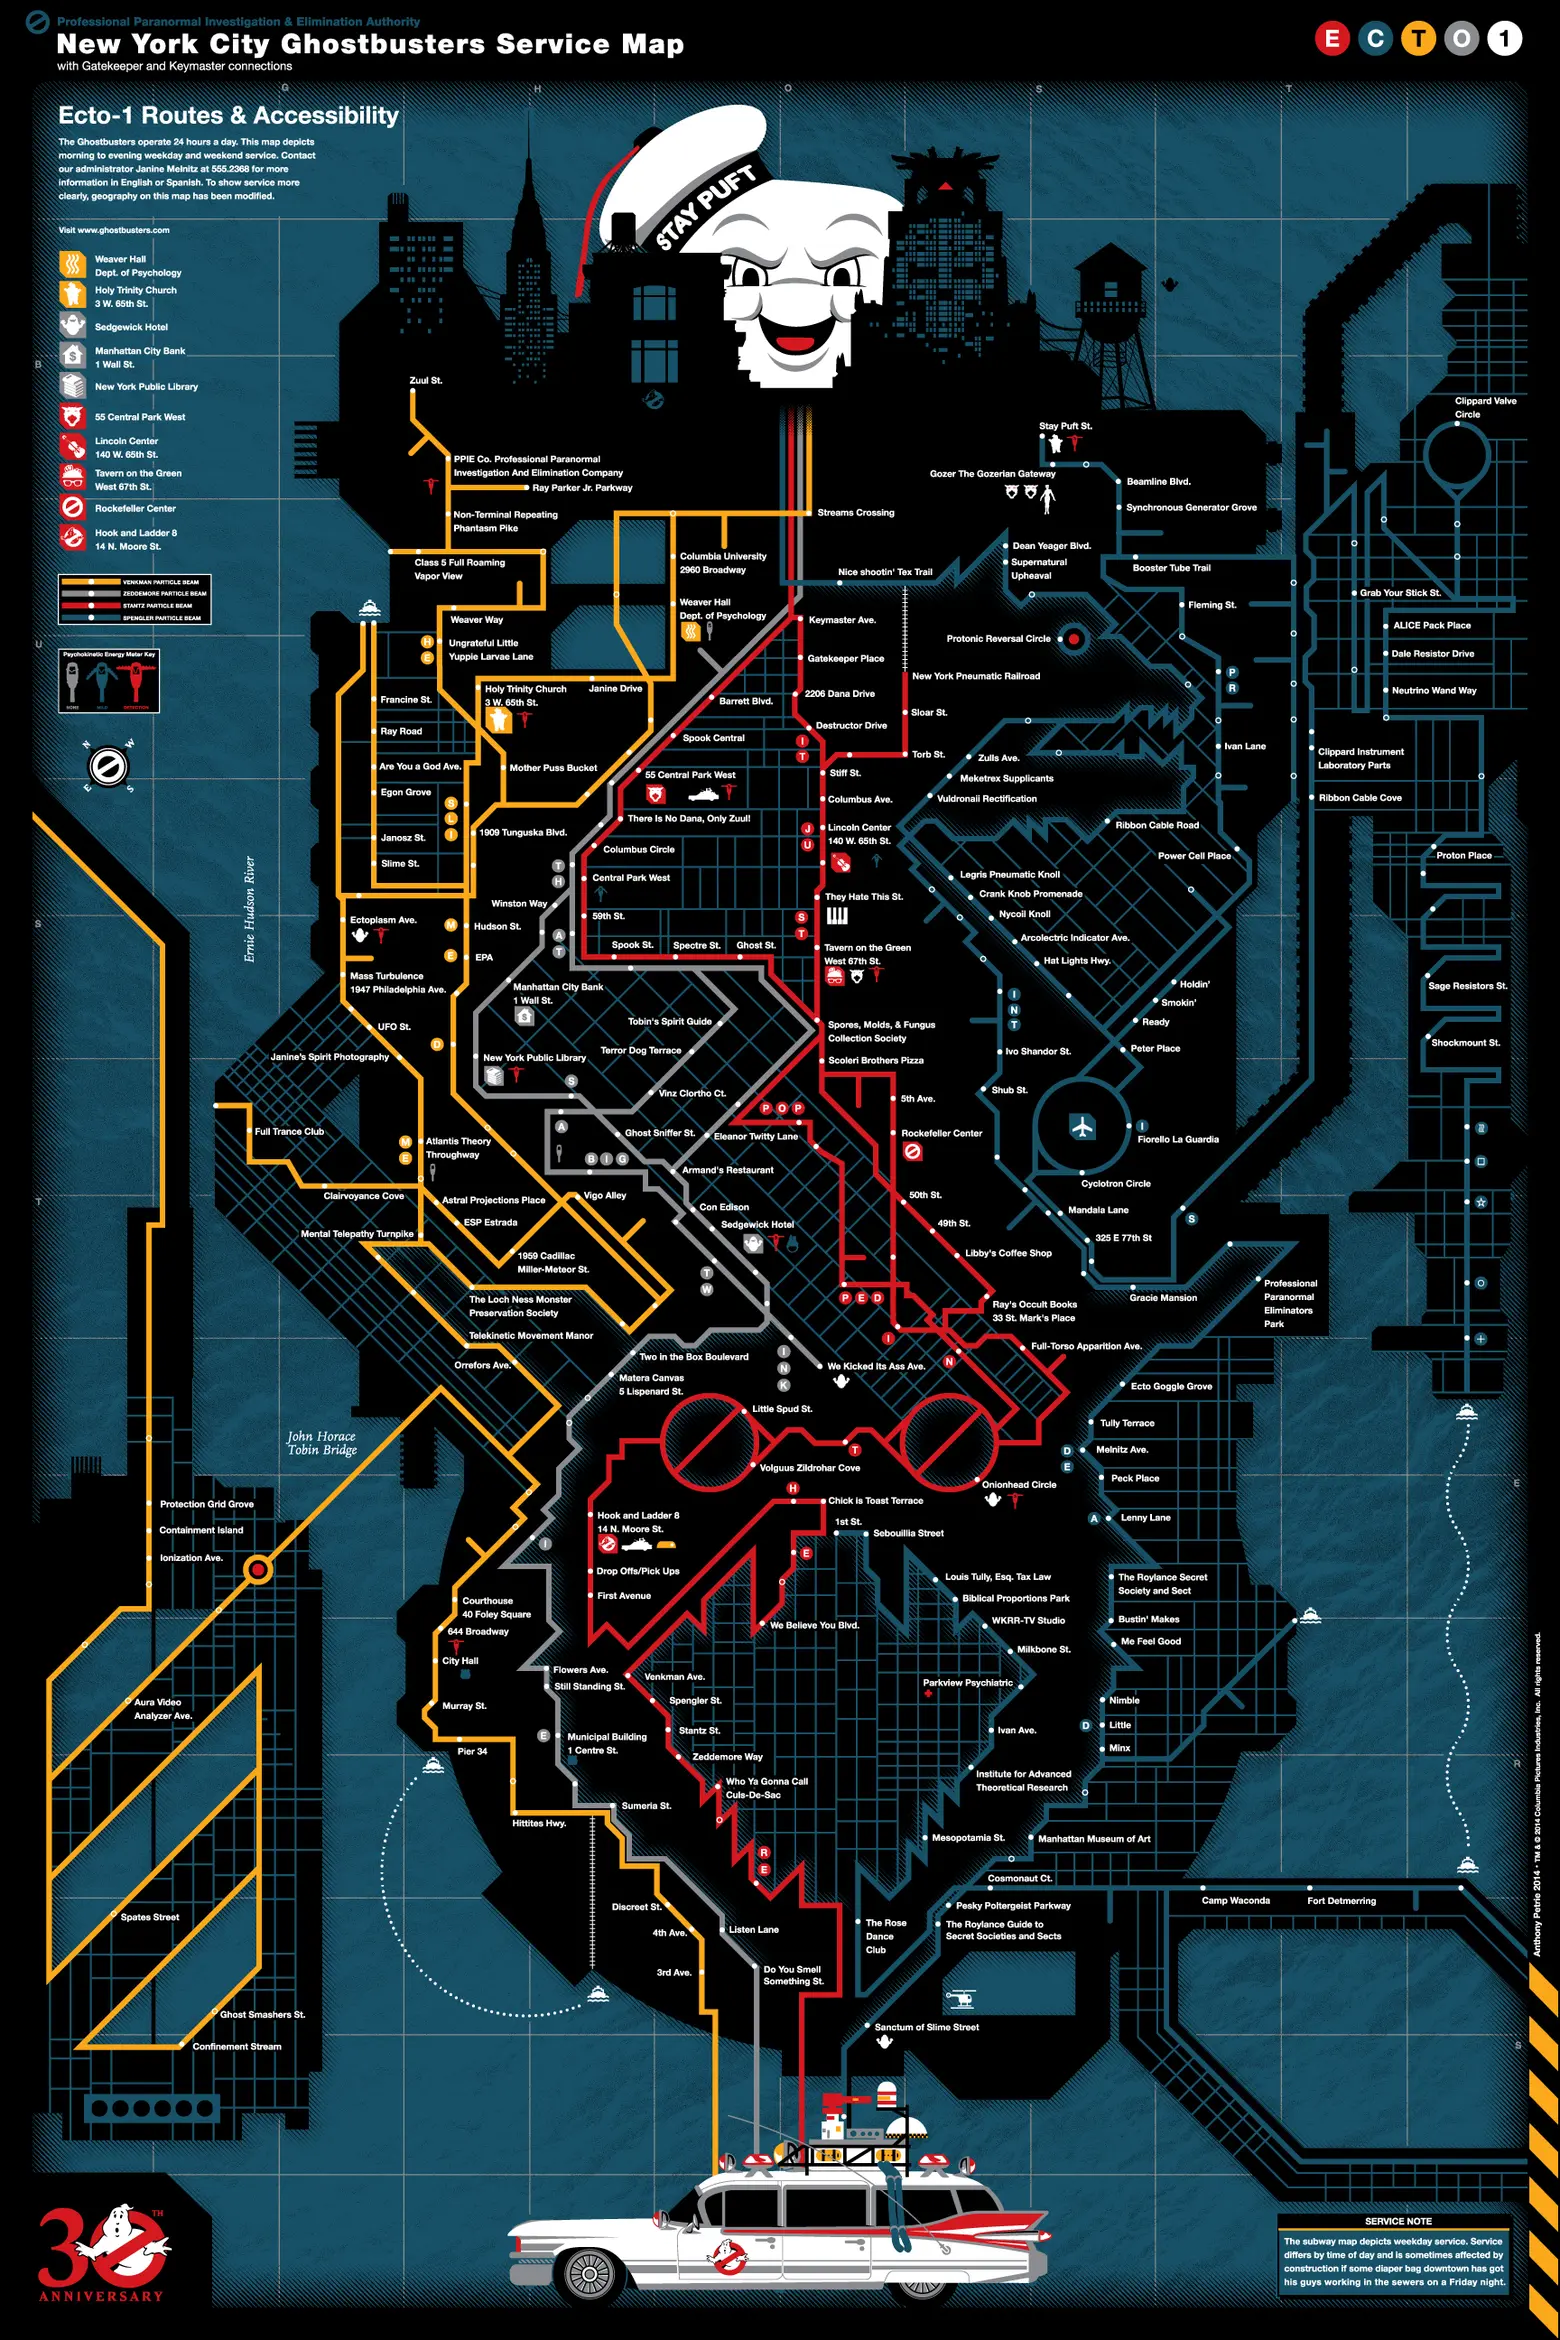 NYC-Ghostbusters Service Map